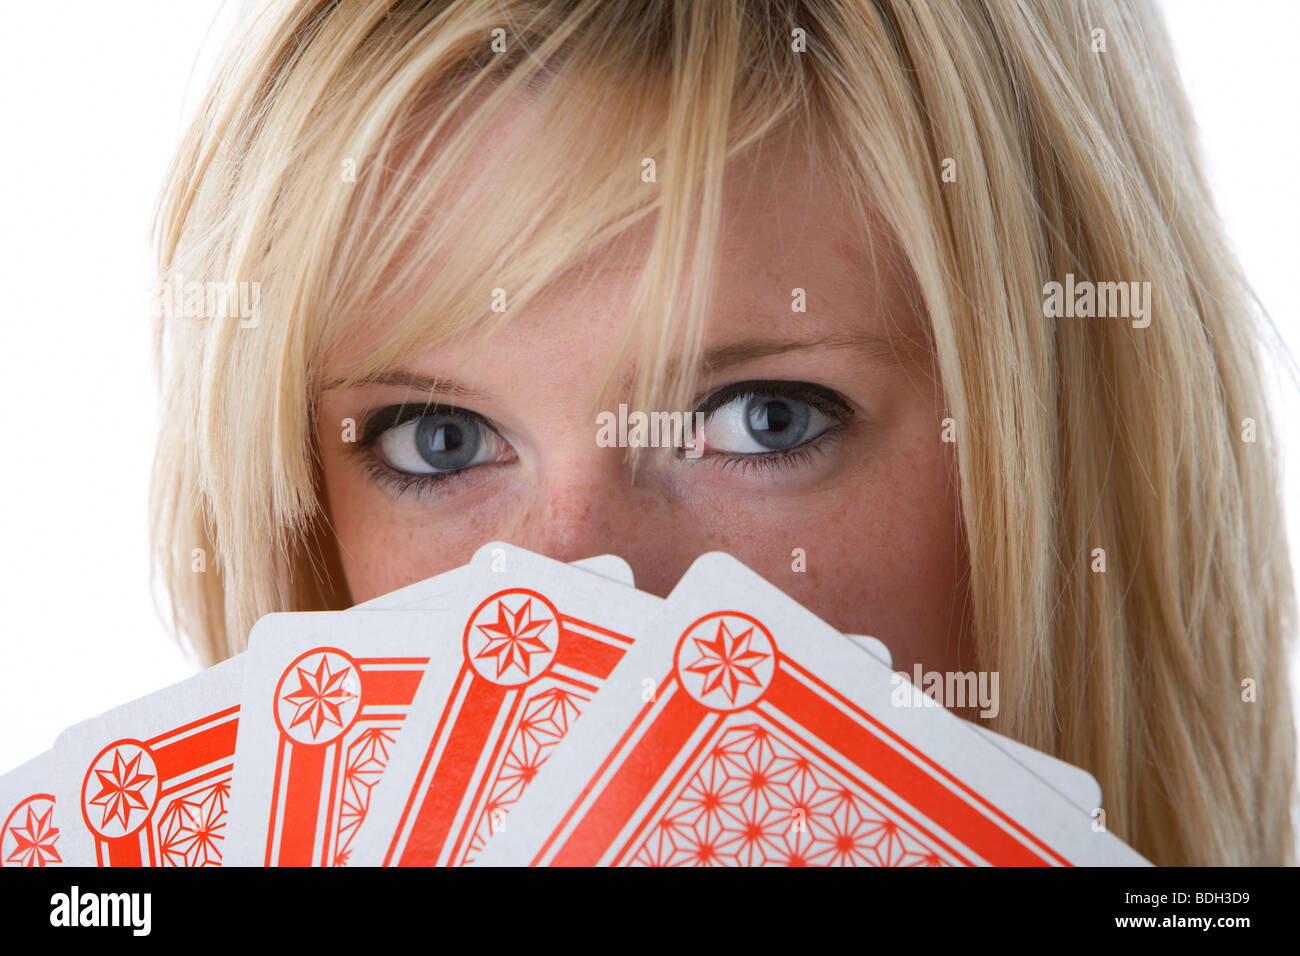 young 20 year old blonde woman holding five large playing cards over her face Stock Photo